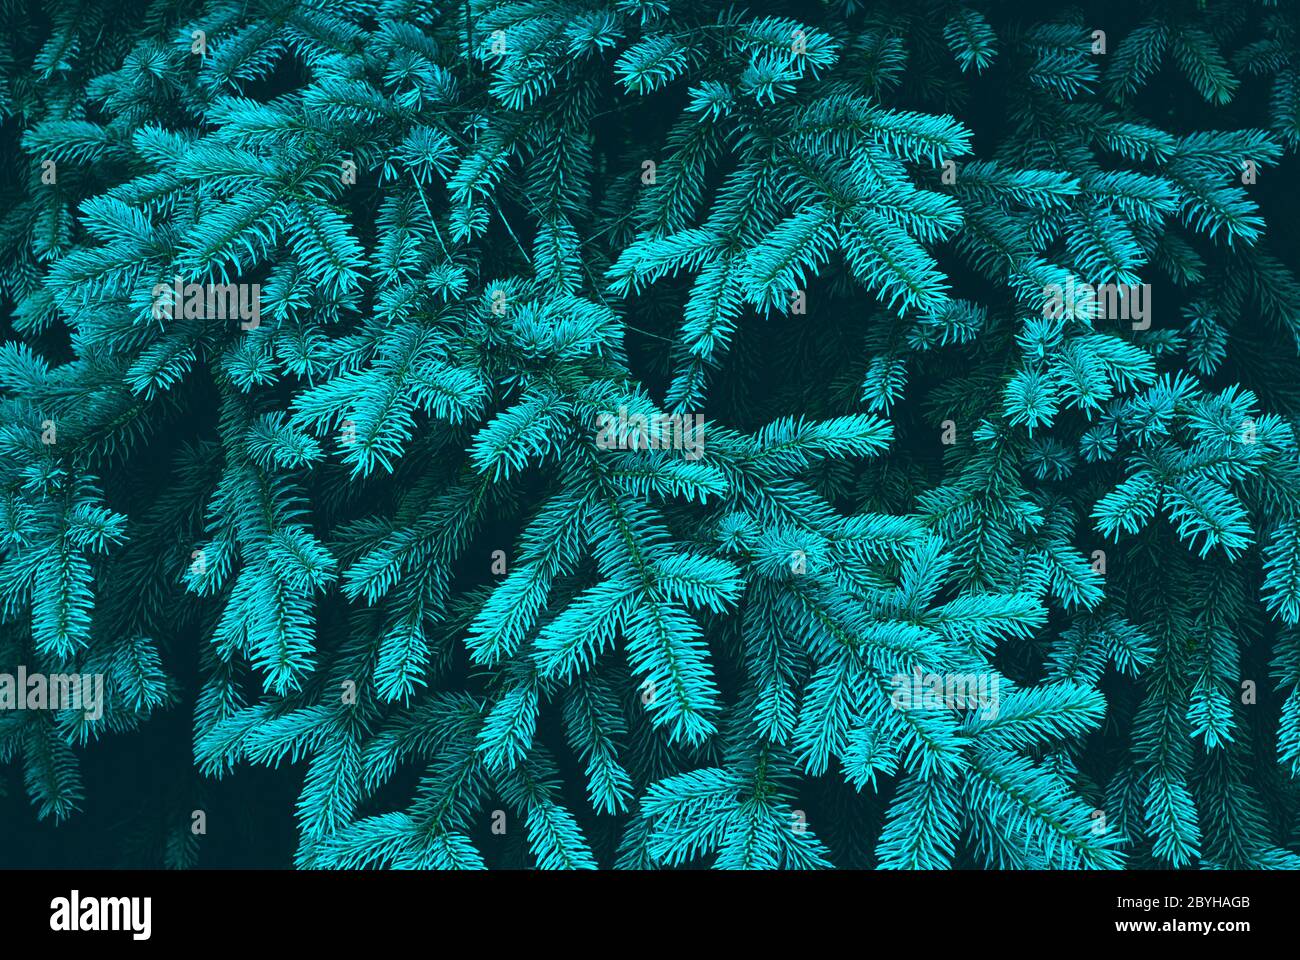 Blue spruce branches texture close-up Stock Photo